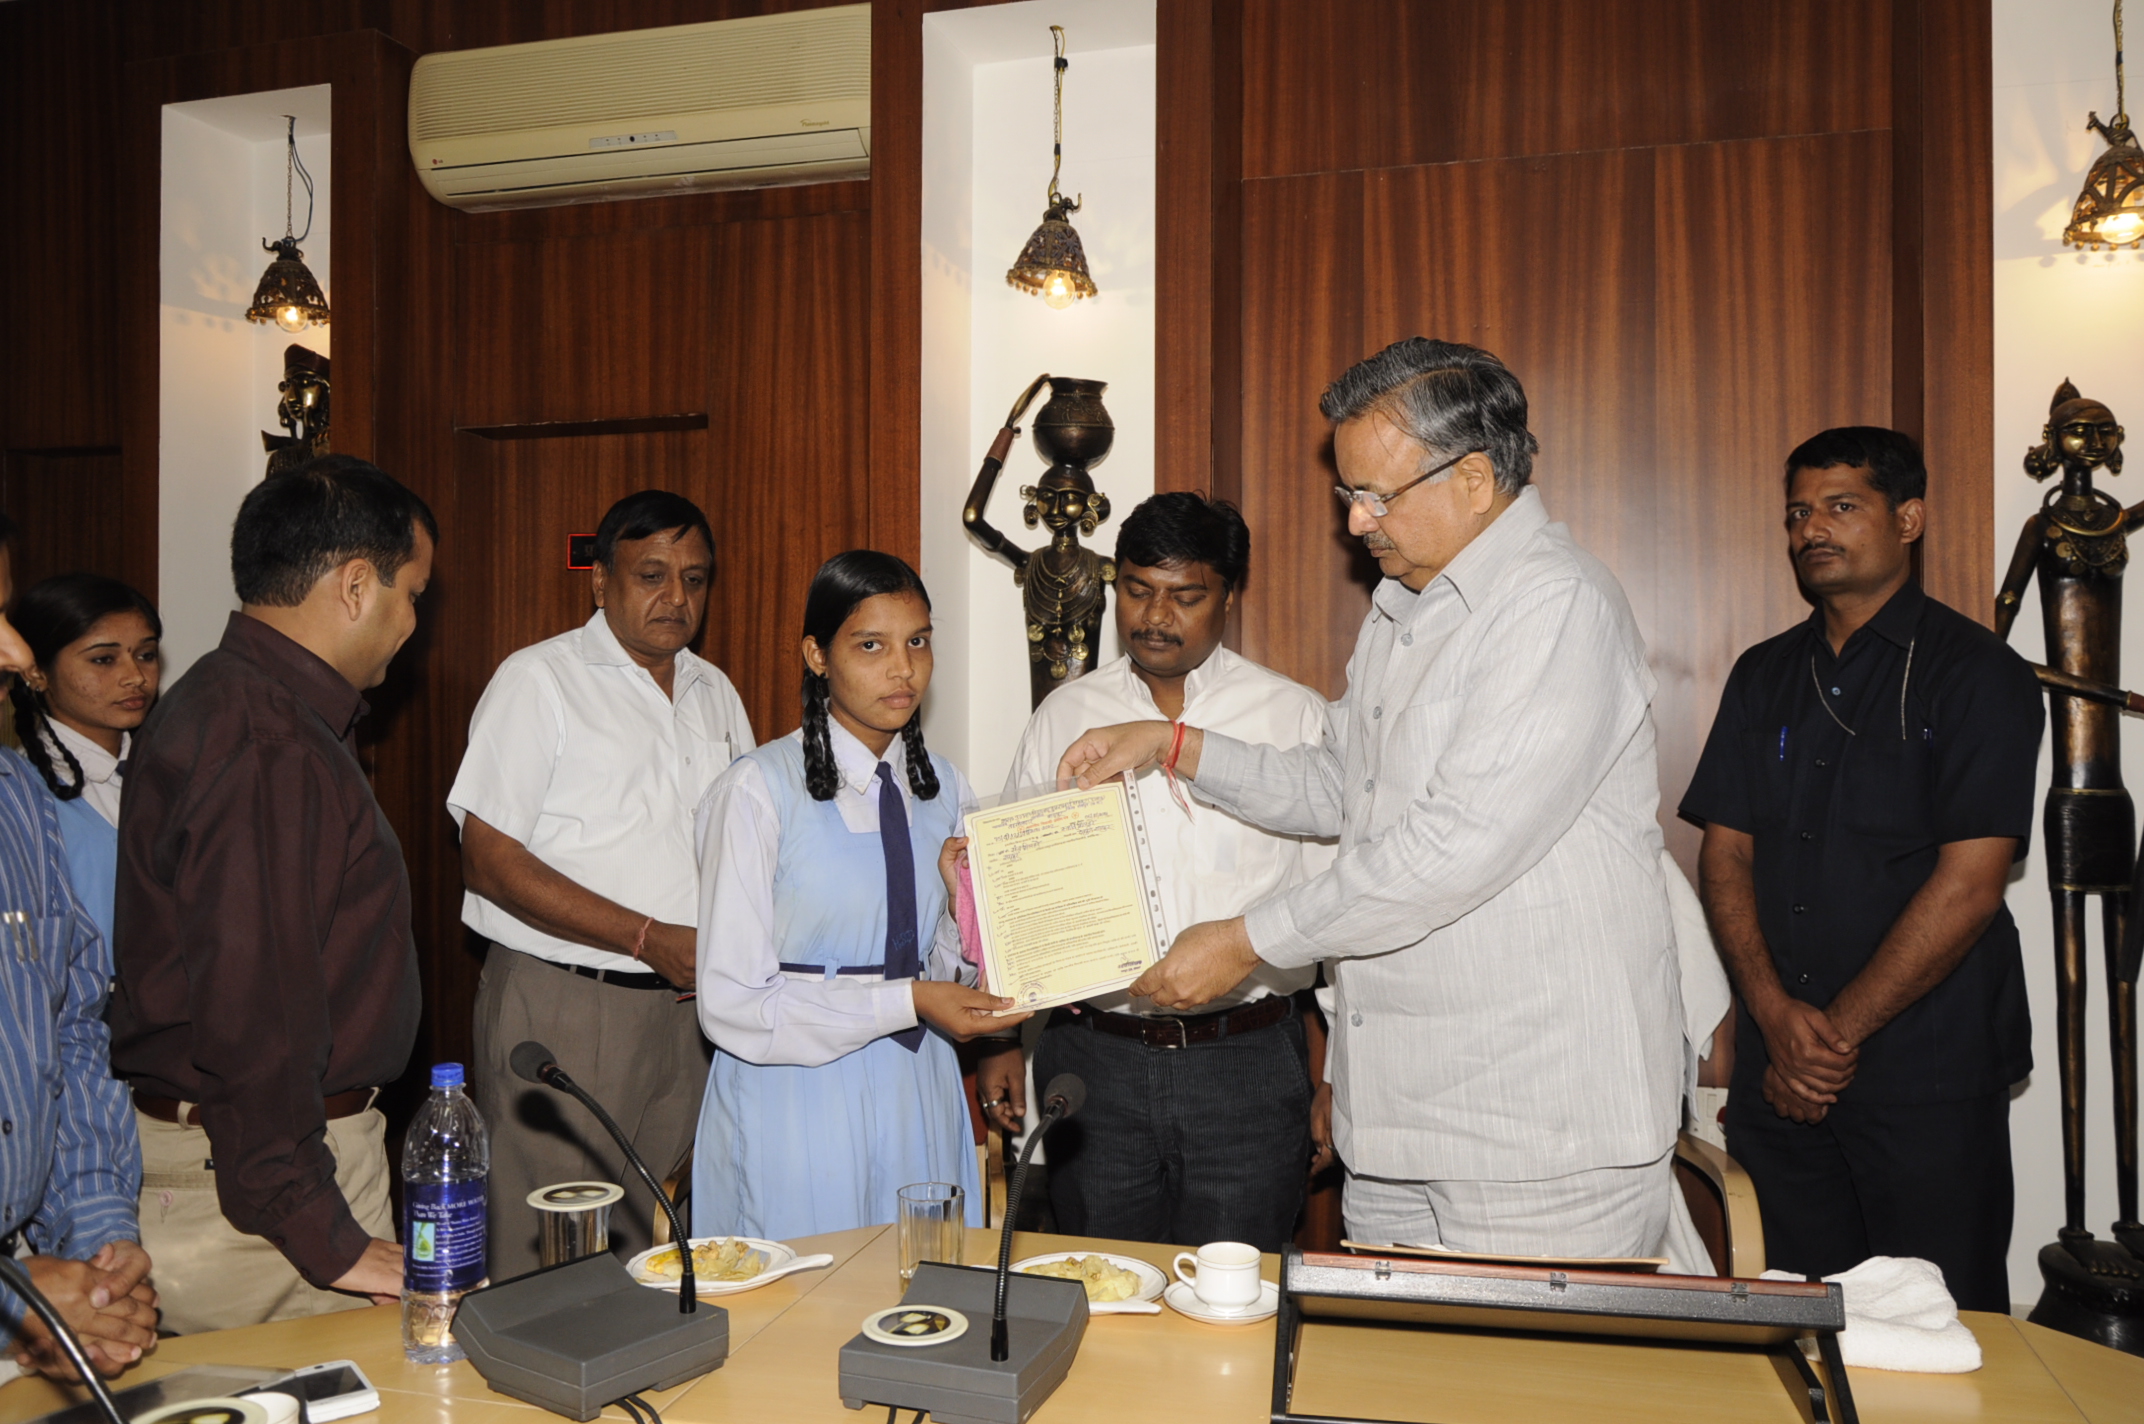 Chief Minister Dr. Raman Singh handing  the caste certificate to a student after inauguration